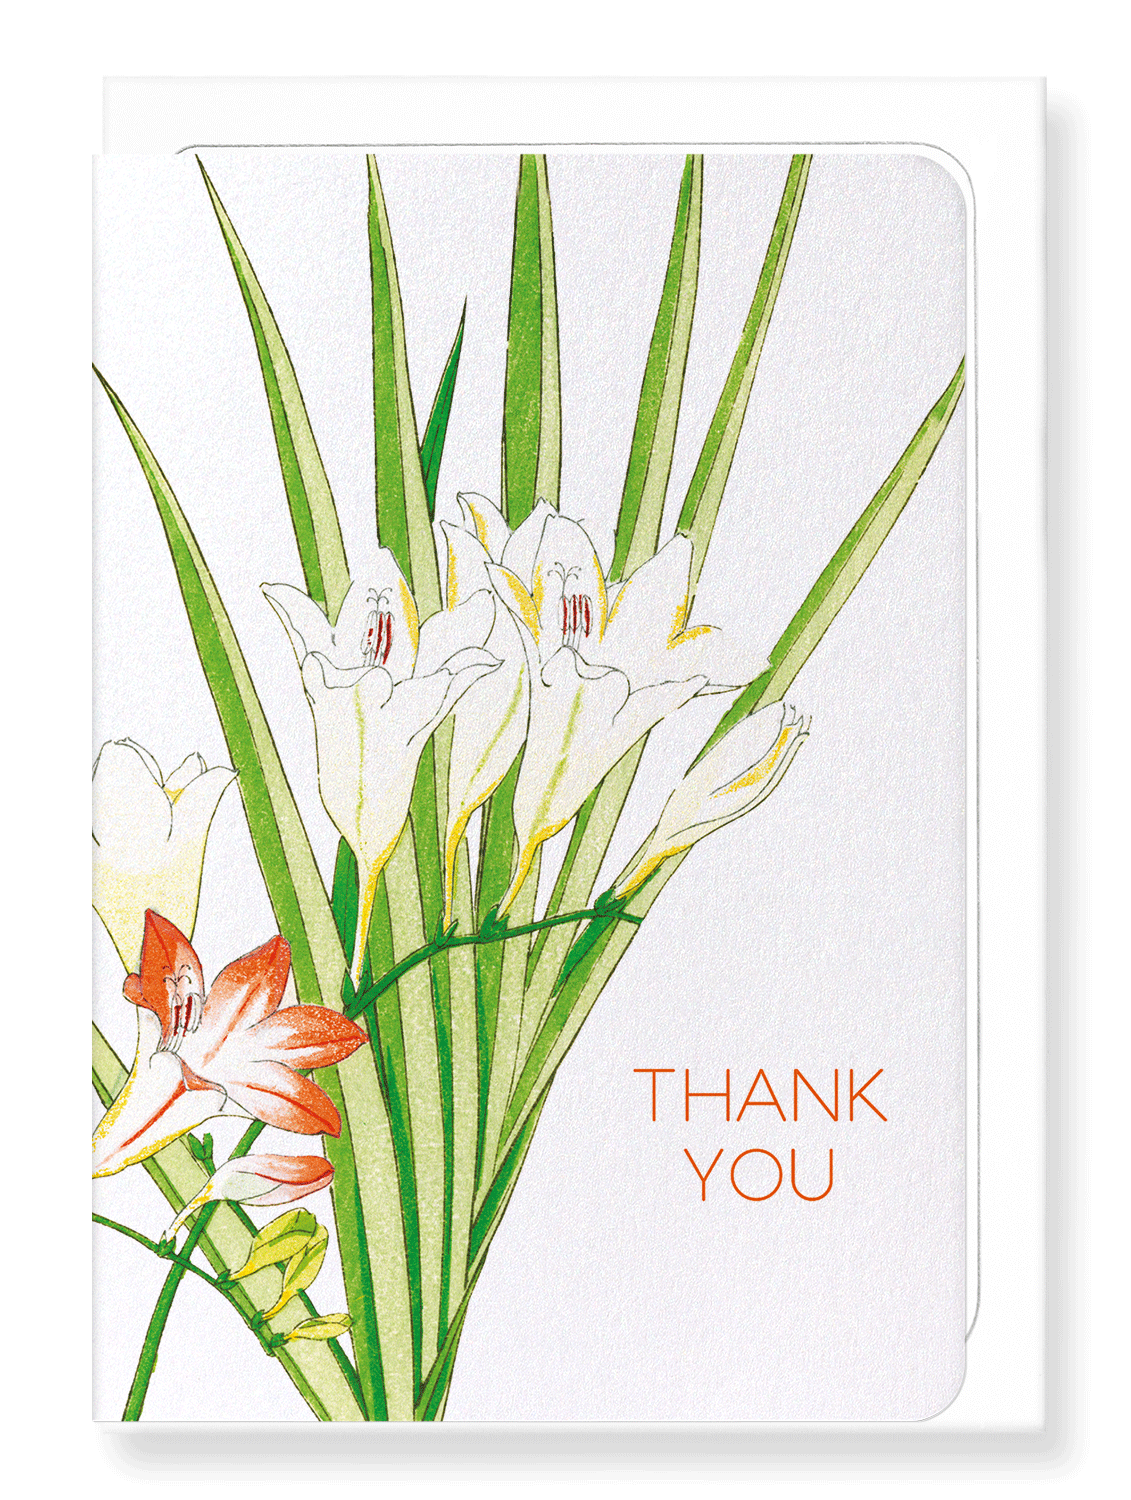 Ezen Designs - Thank you (freesia flower) - Greeting Card - Front